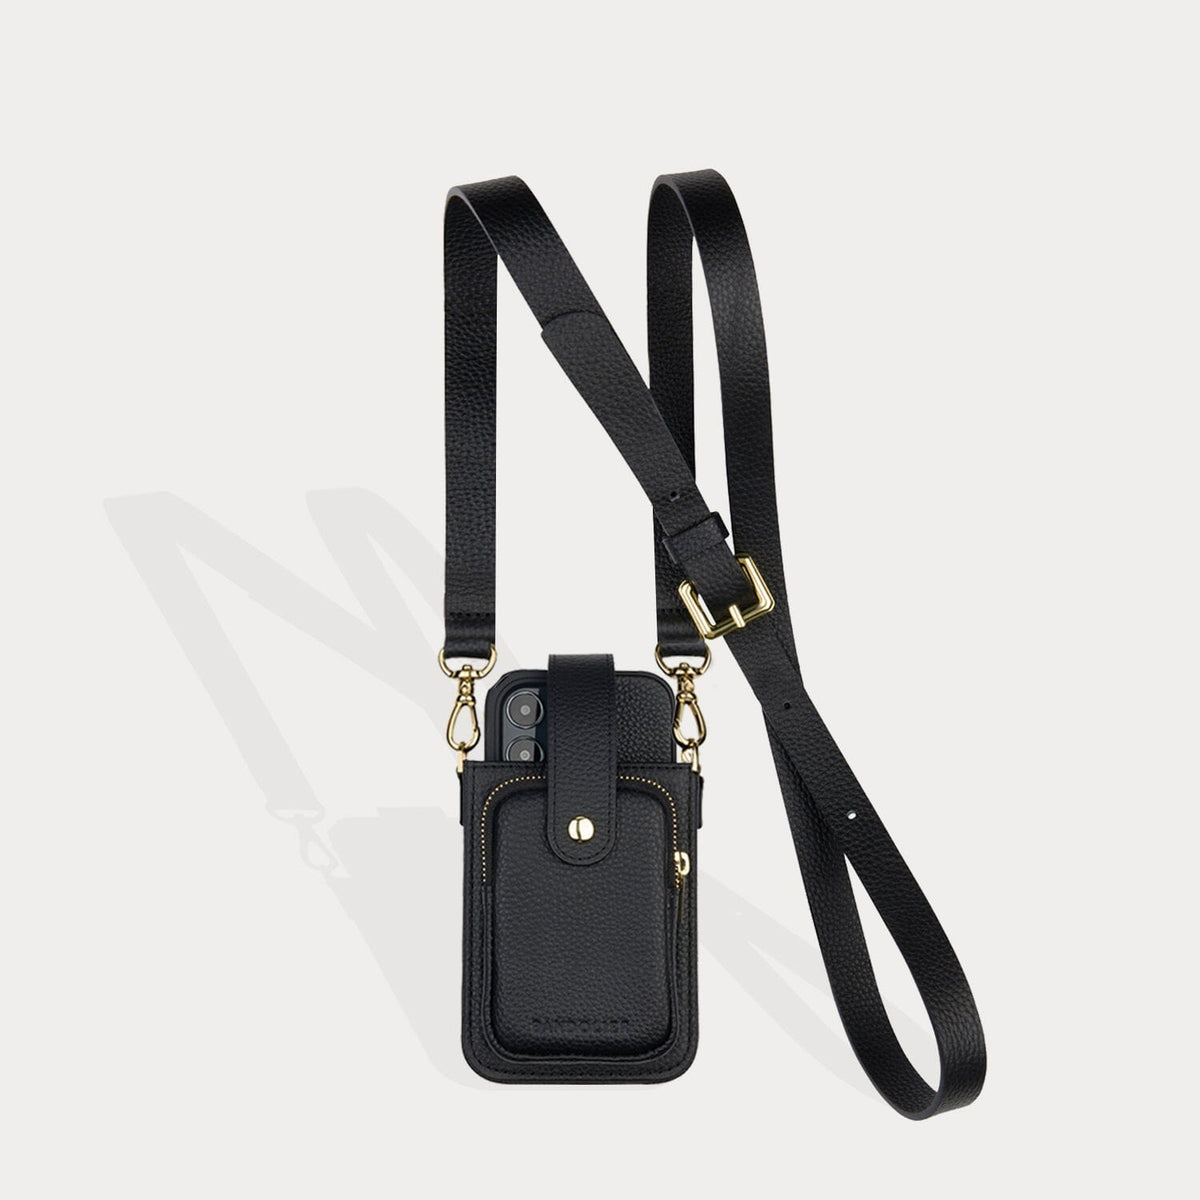 Hailey Phone Pouch and Holster - Black/Gold – Bandolier